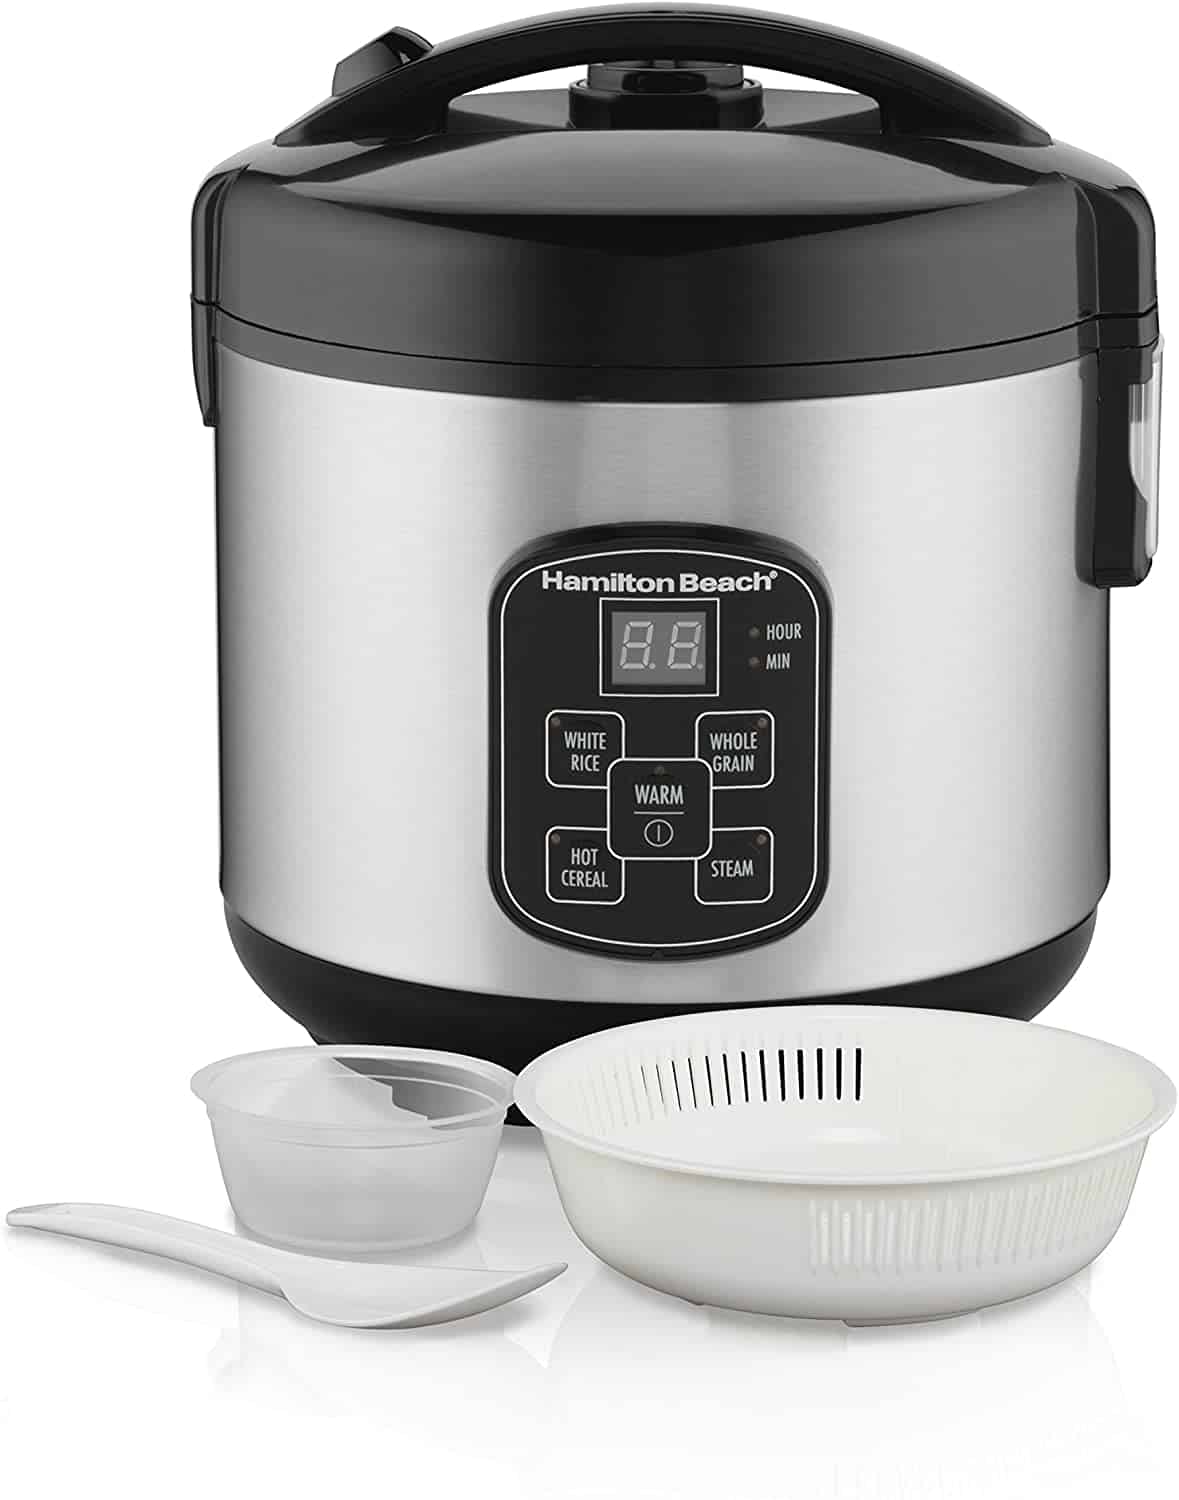 Best budget rice cooker for sticky rice- Hamilton Beach Digital